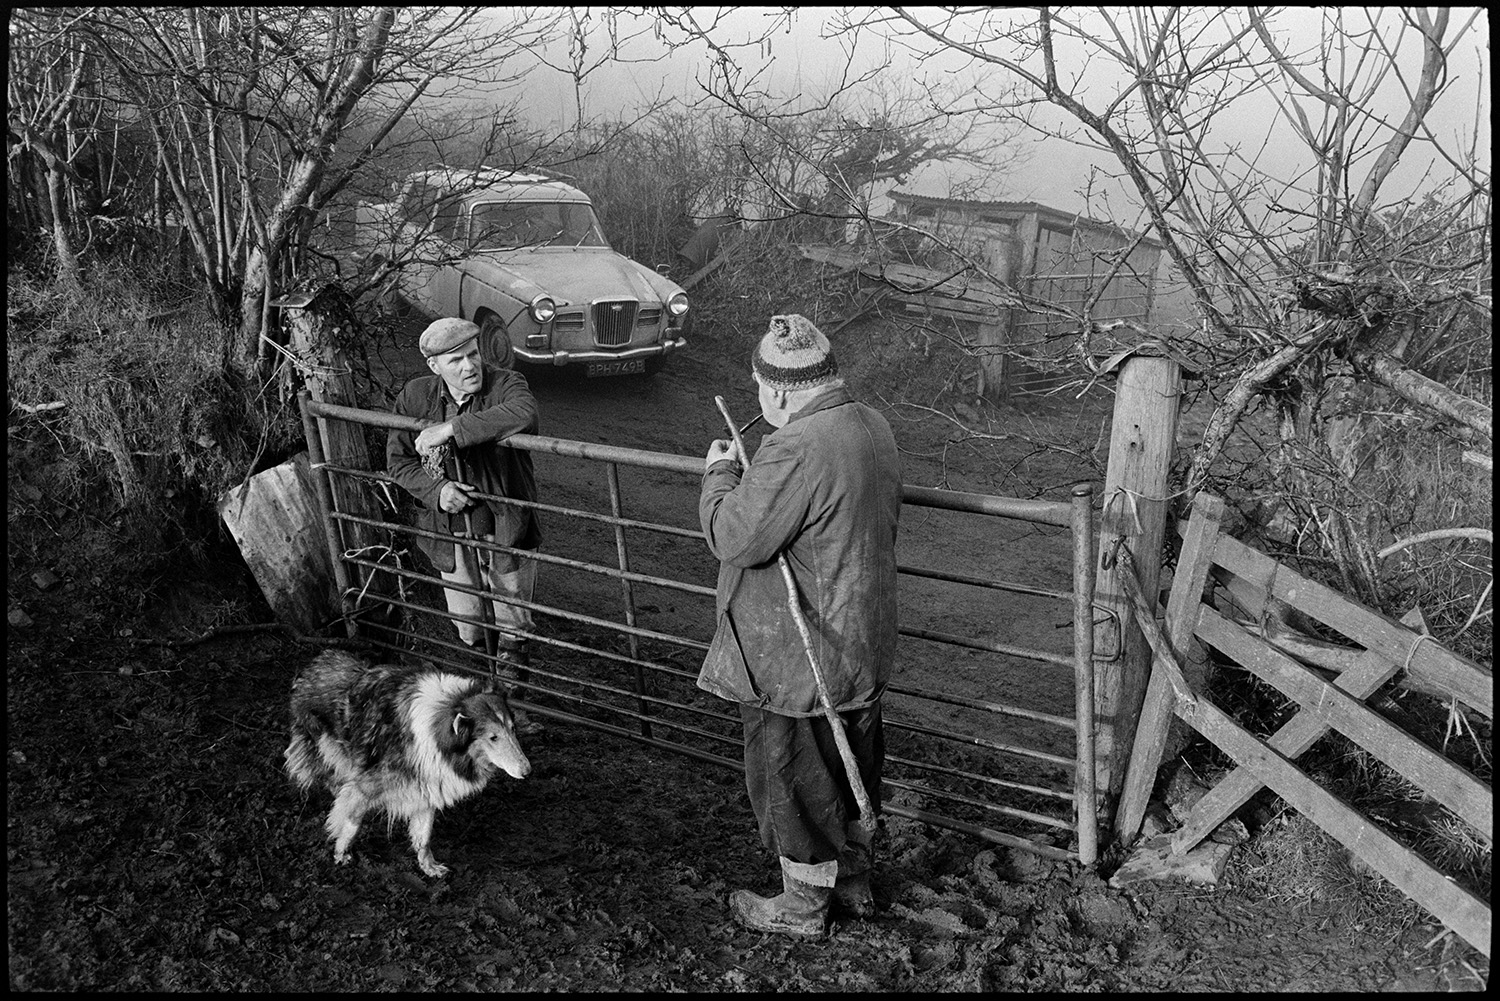 Two farmers chatting over gate, dog and muddy field, car in background.
[Alf Pugsley and Archie Parkhouse chatting over a metal field gate at Millhams, Dolton. Archie Parkhouse is smoking a pipe. A car is parked in the lane behind the muddy gateway and a field with a shed are visible in the background. Sally the dog is stood by Archie Parkhouse.]